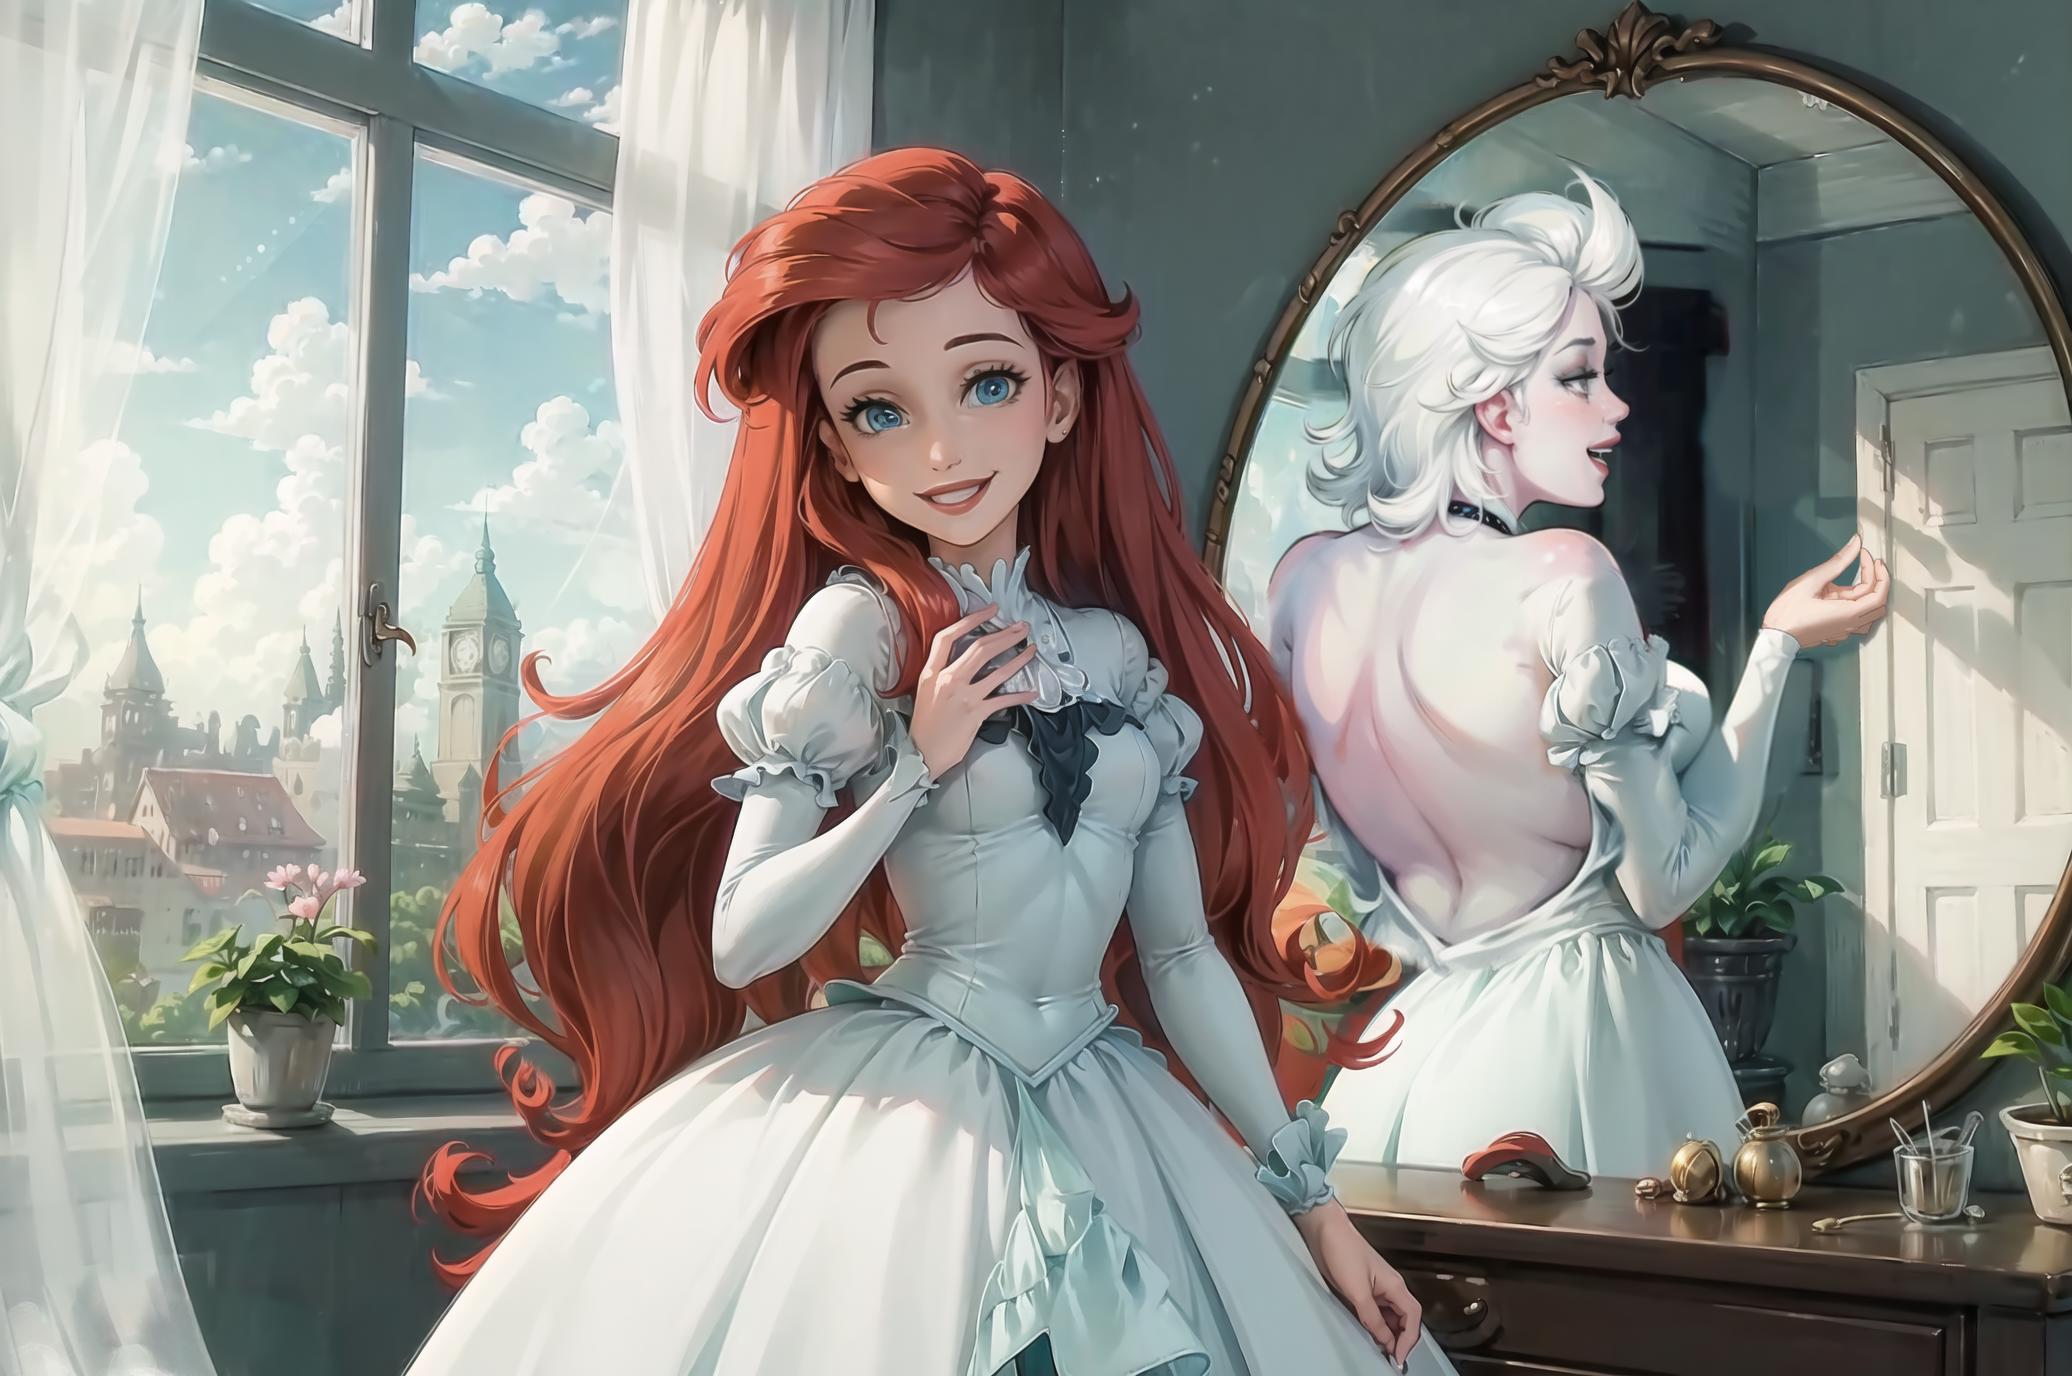 A red-haired girl with blue eyes is smiling at her reflection in a mirror, wearing a white dress.